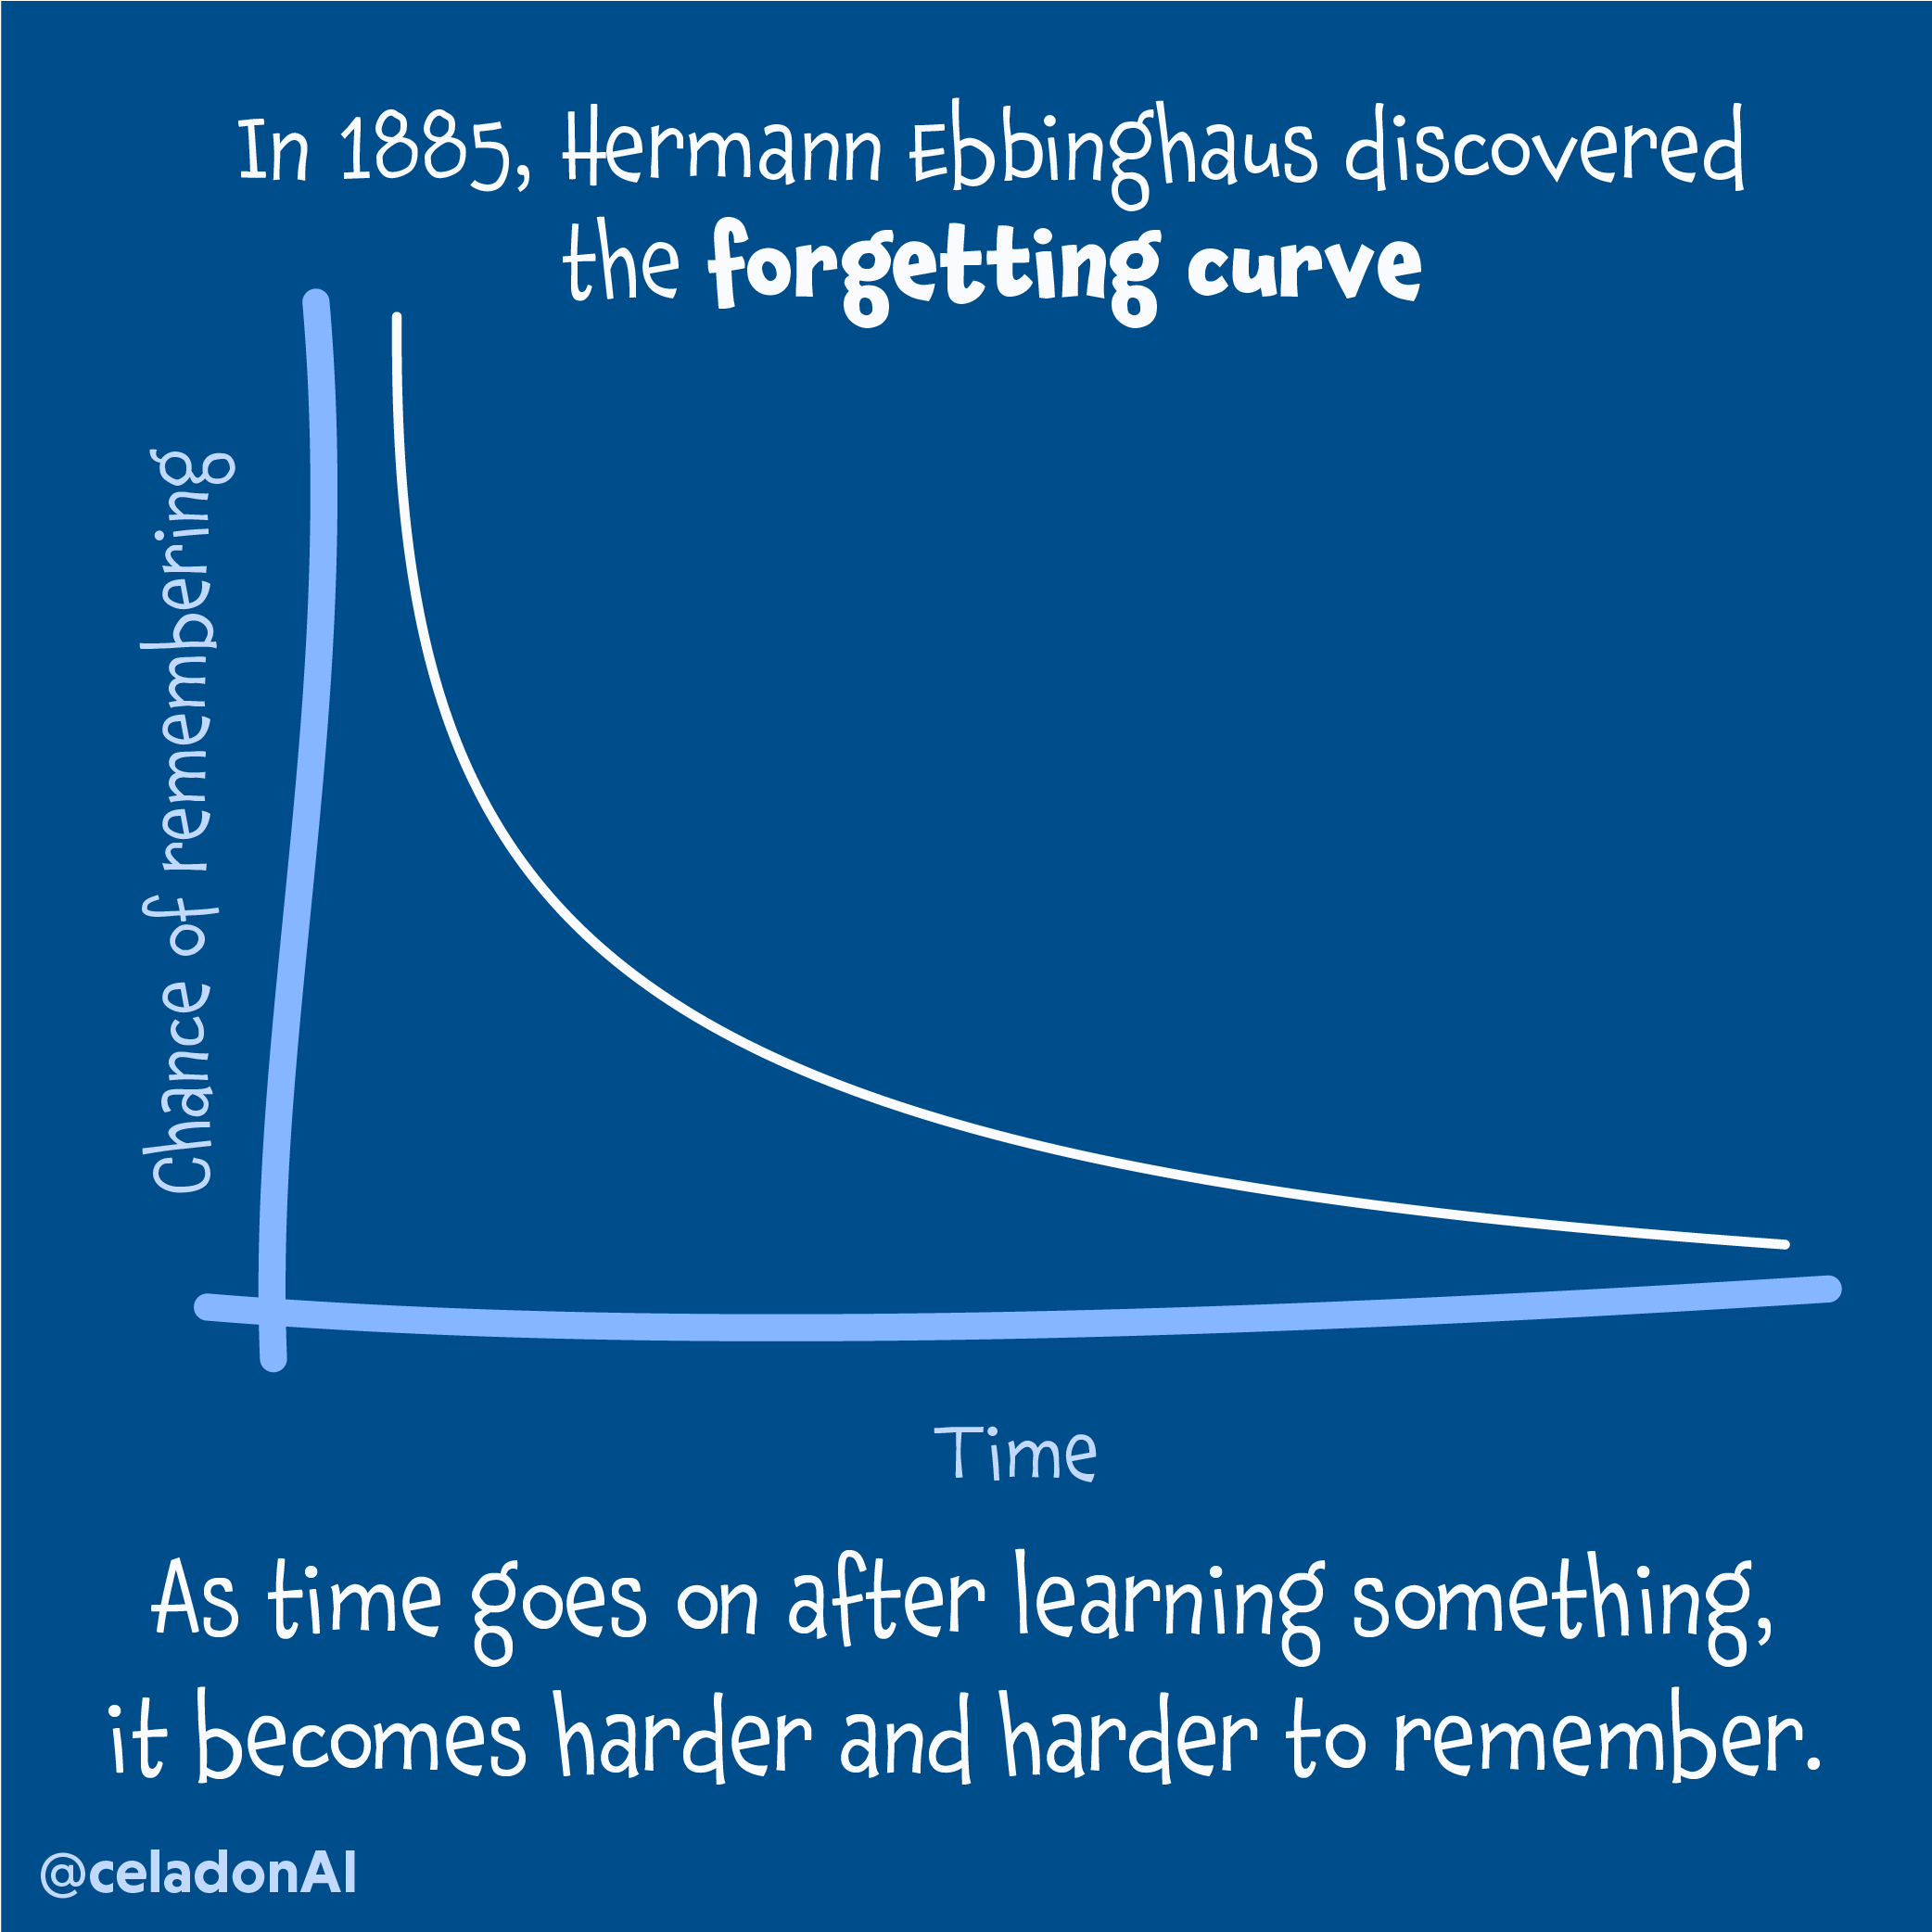 In 1885, Hermann Ebbinghous discovered the forgetting curve